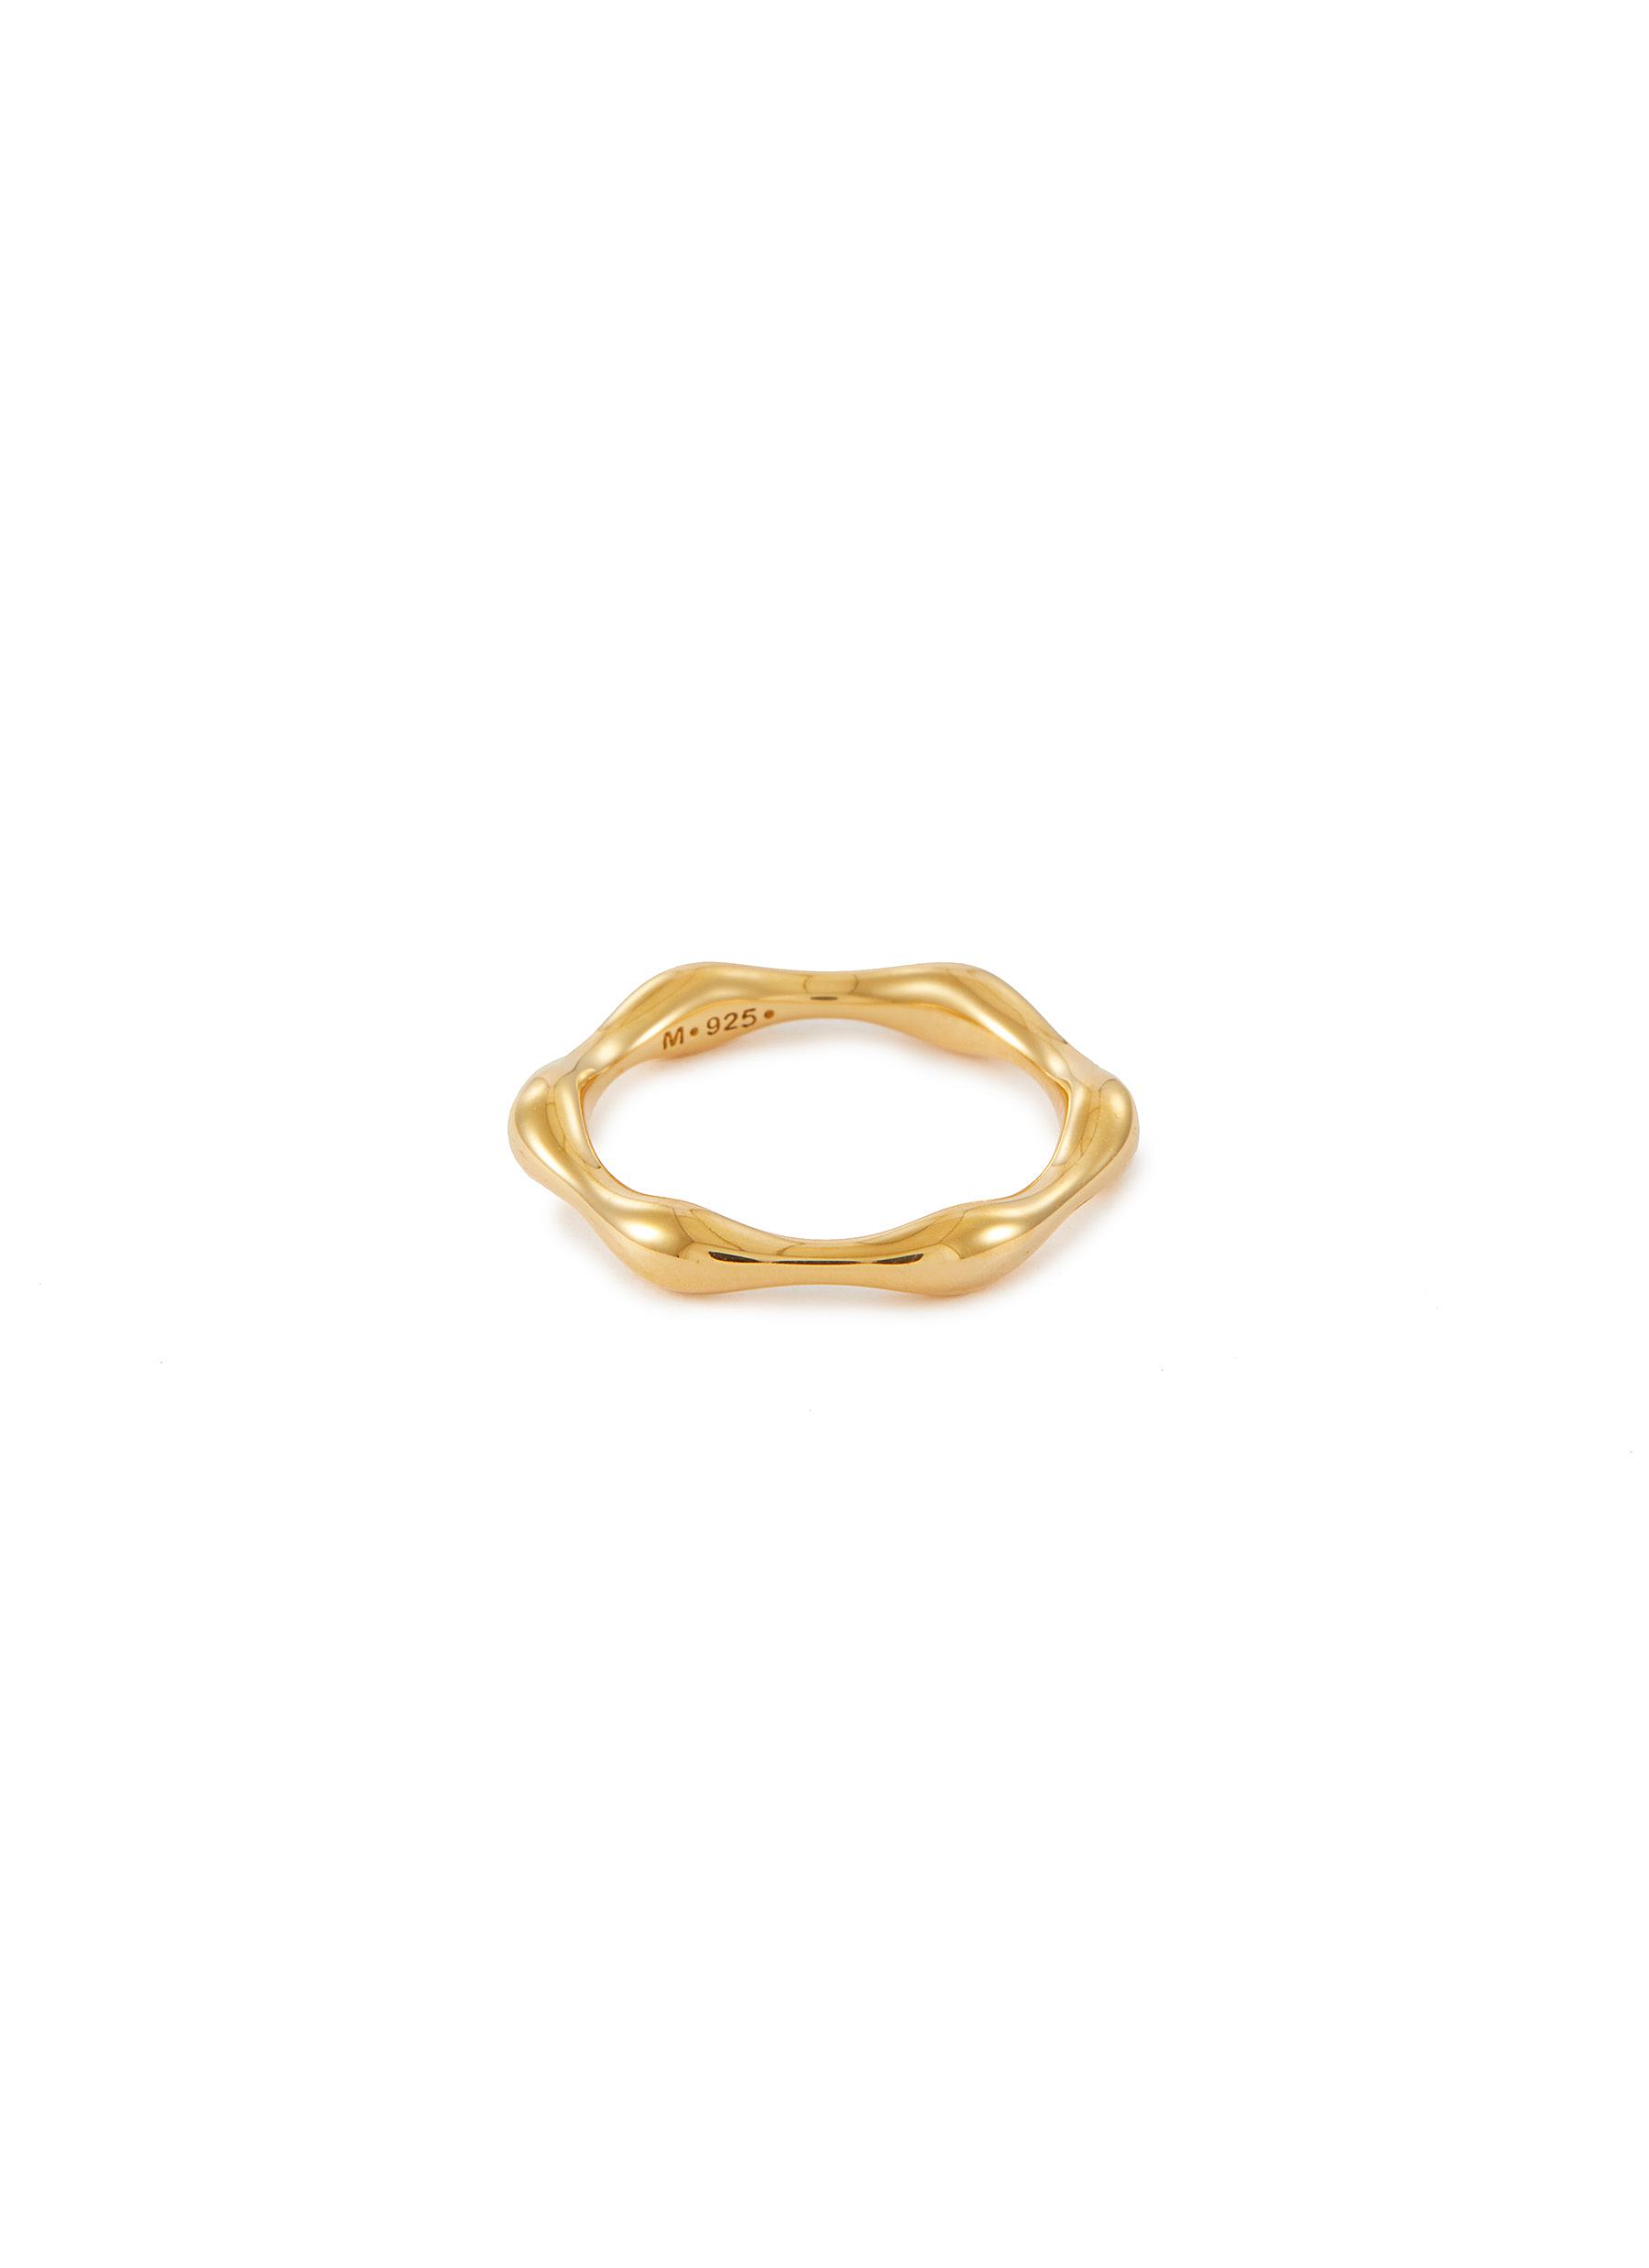 MISSOMA ‘MAGMA' 18K GOLD PLATED STERLING SILVER MOLTEN RING